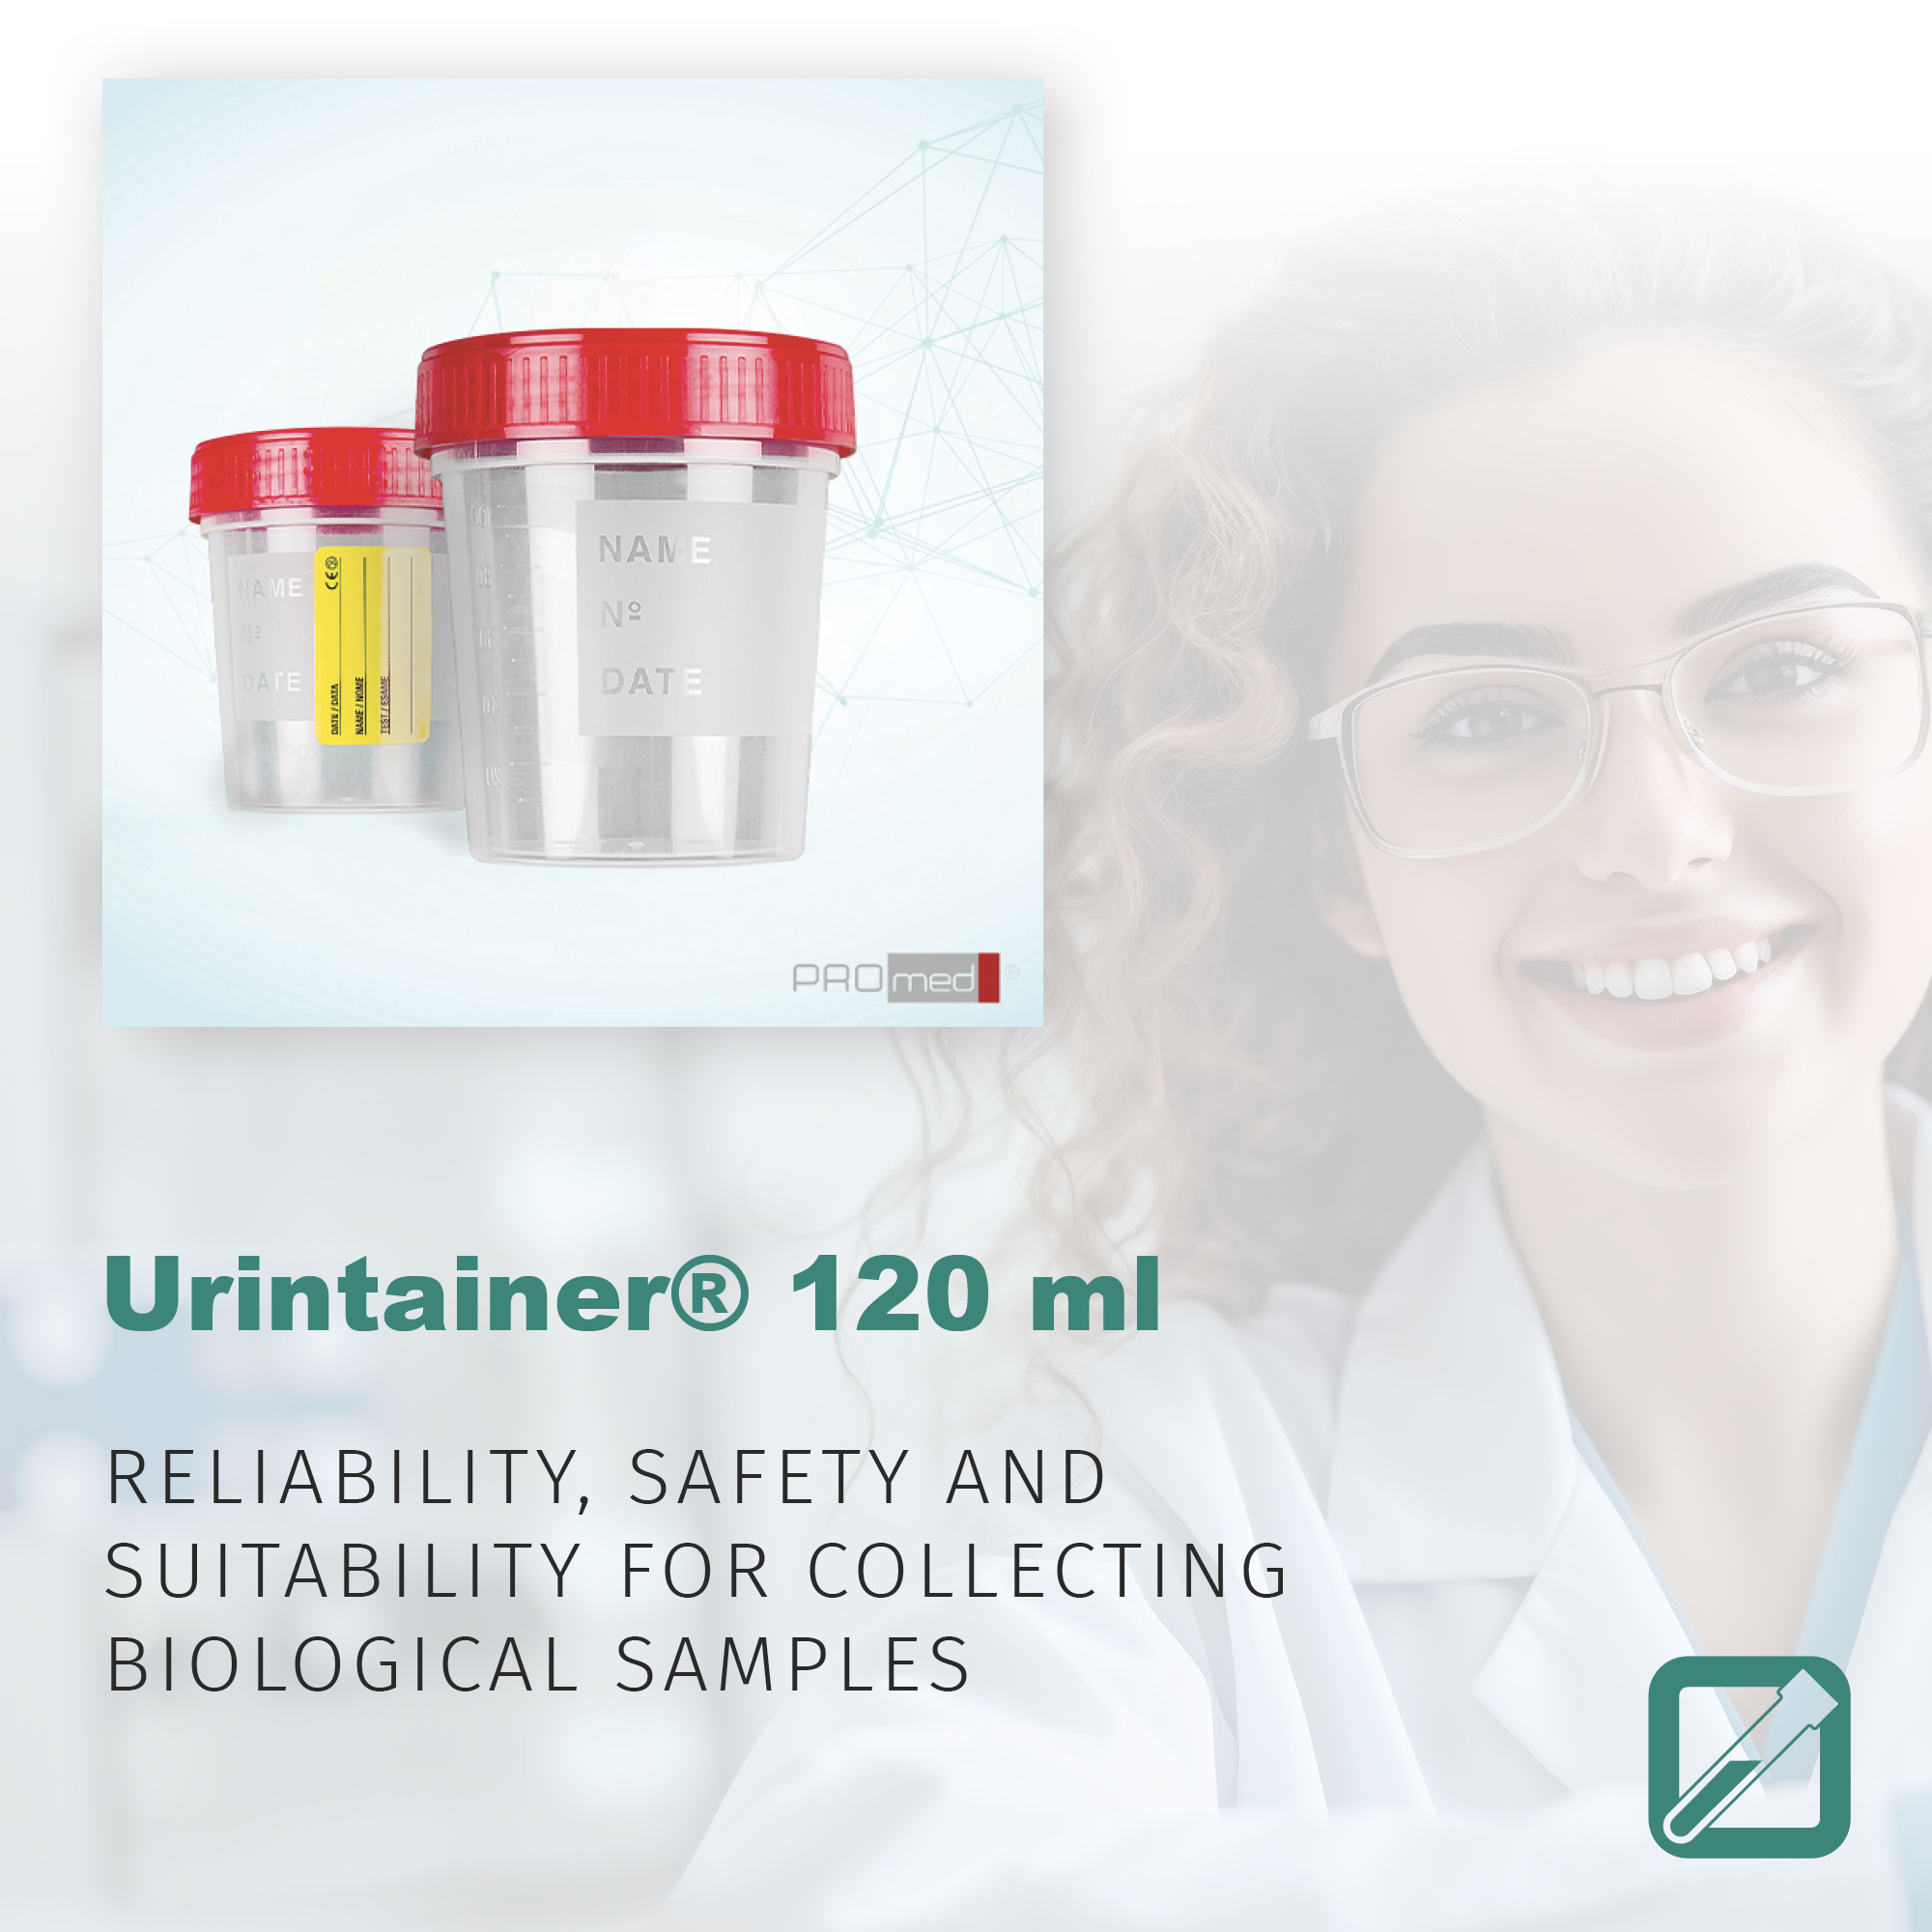 Urintainer® 120 ml containers: reliability, safety and suitability